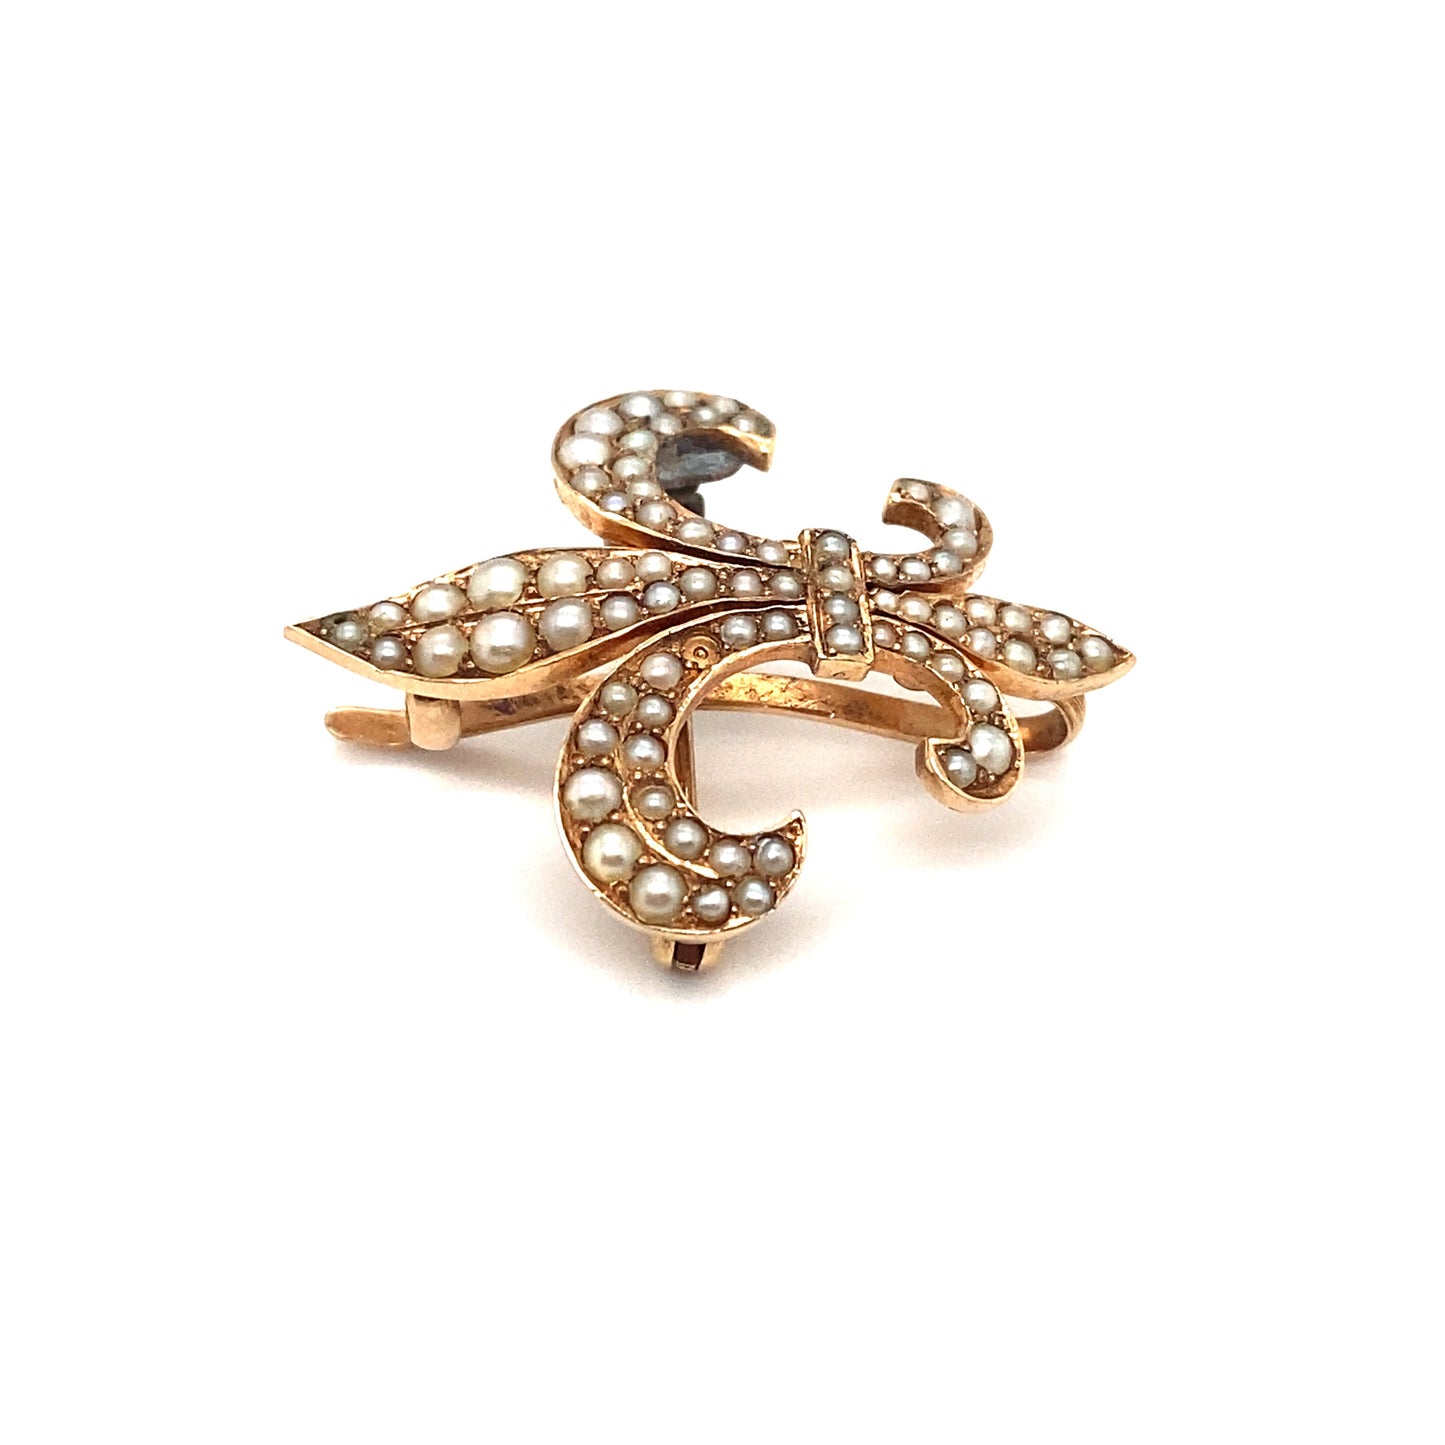 Circa 1890s French Fleur de Lis Seed Pearl Brooch in 14K Gold